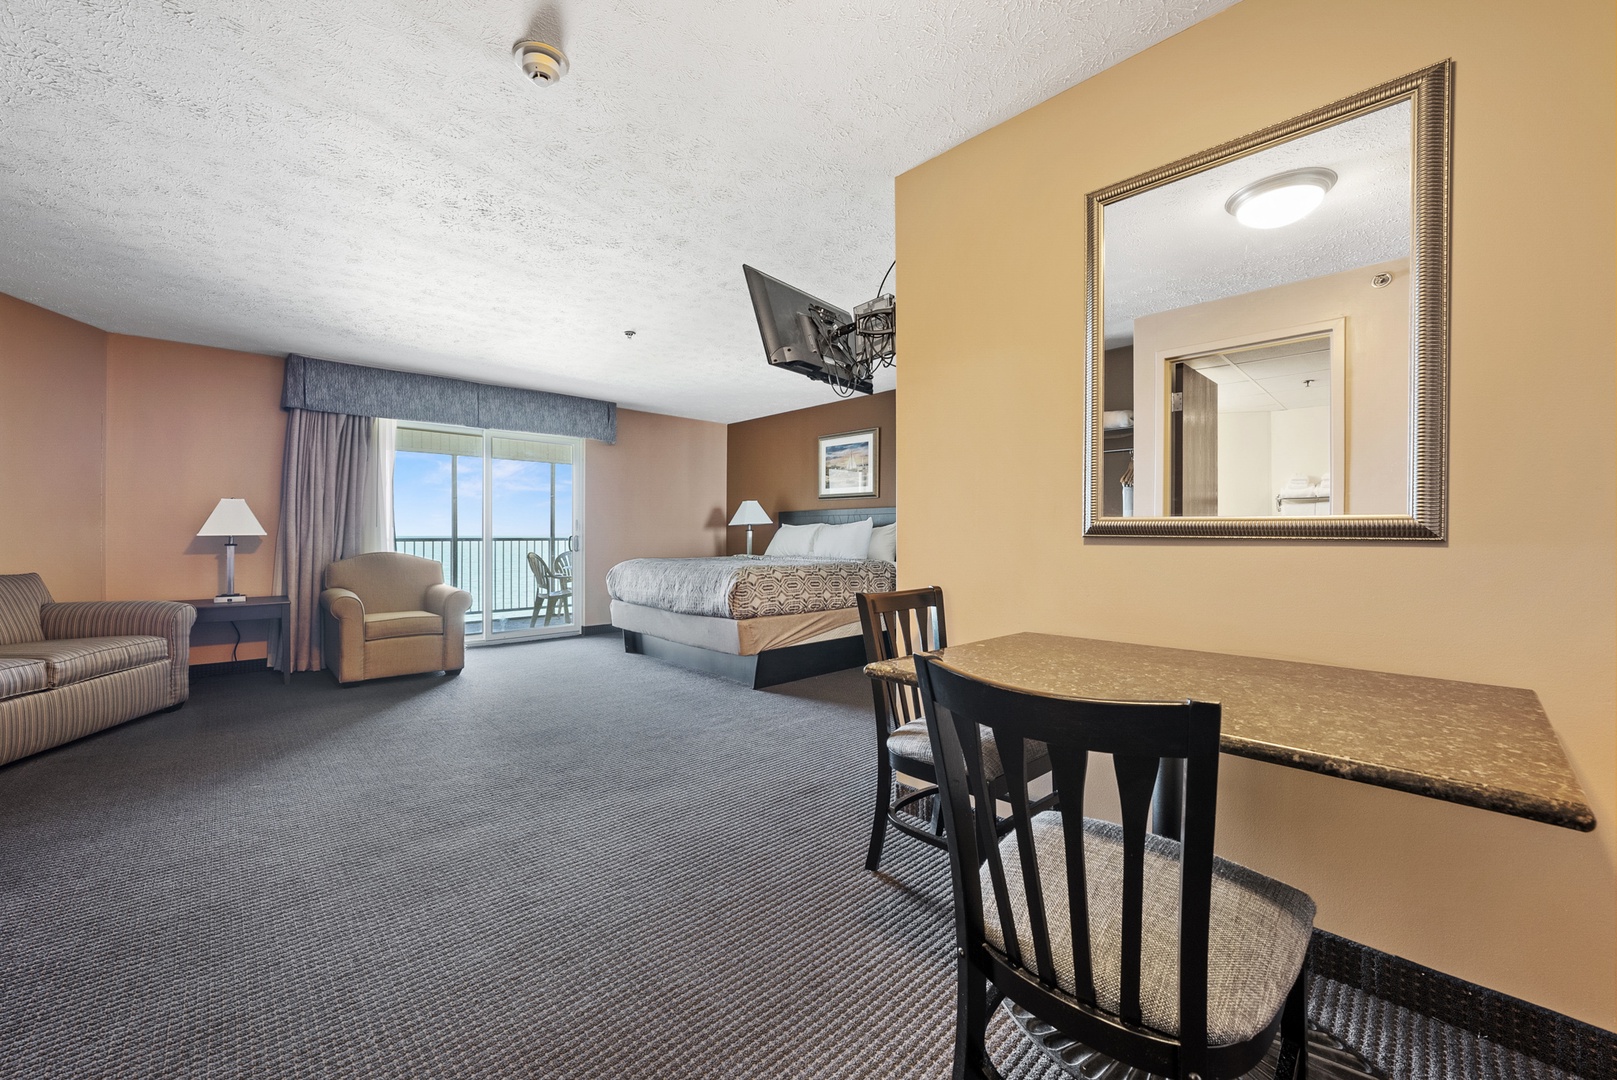 Find your perfect home away from home at Bayshore Resort on Put-in-Bay island